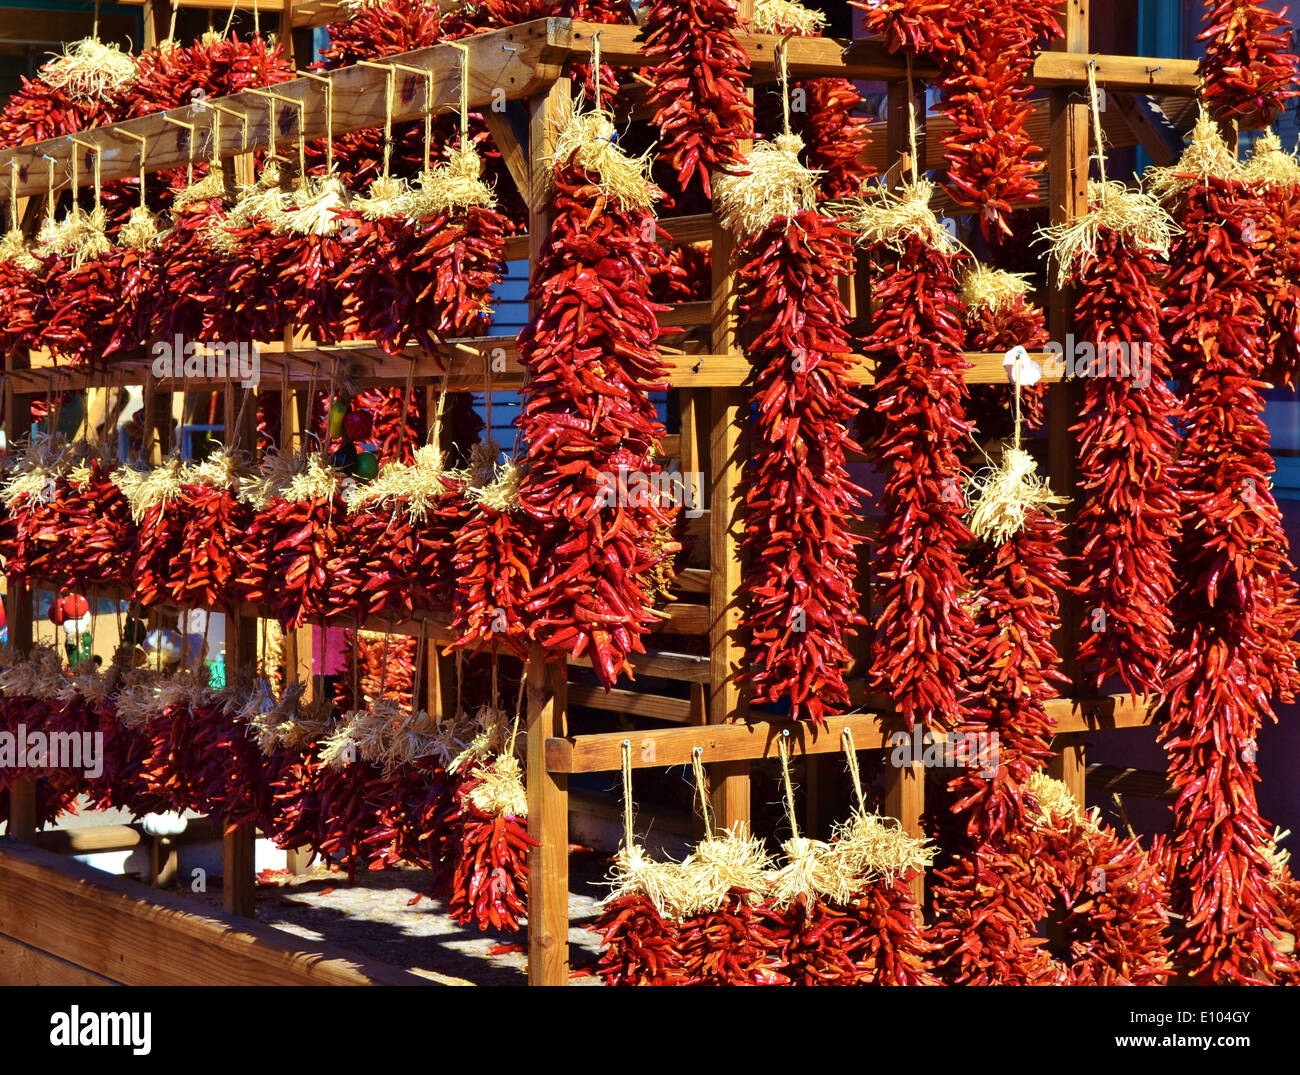 Bright Red Hanging Chili Peppers Stock Photo